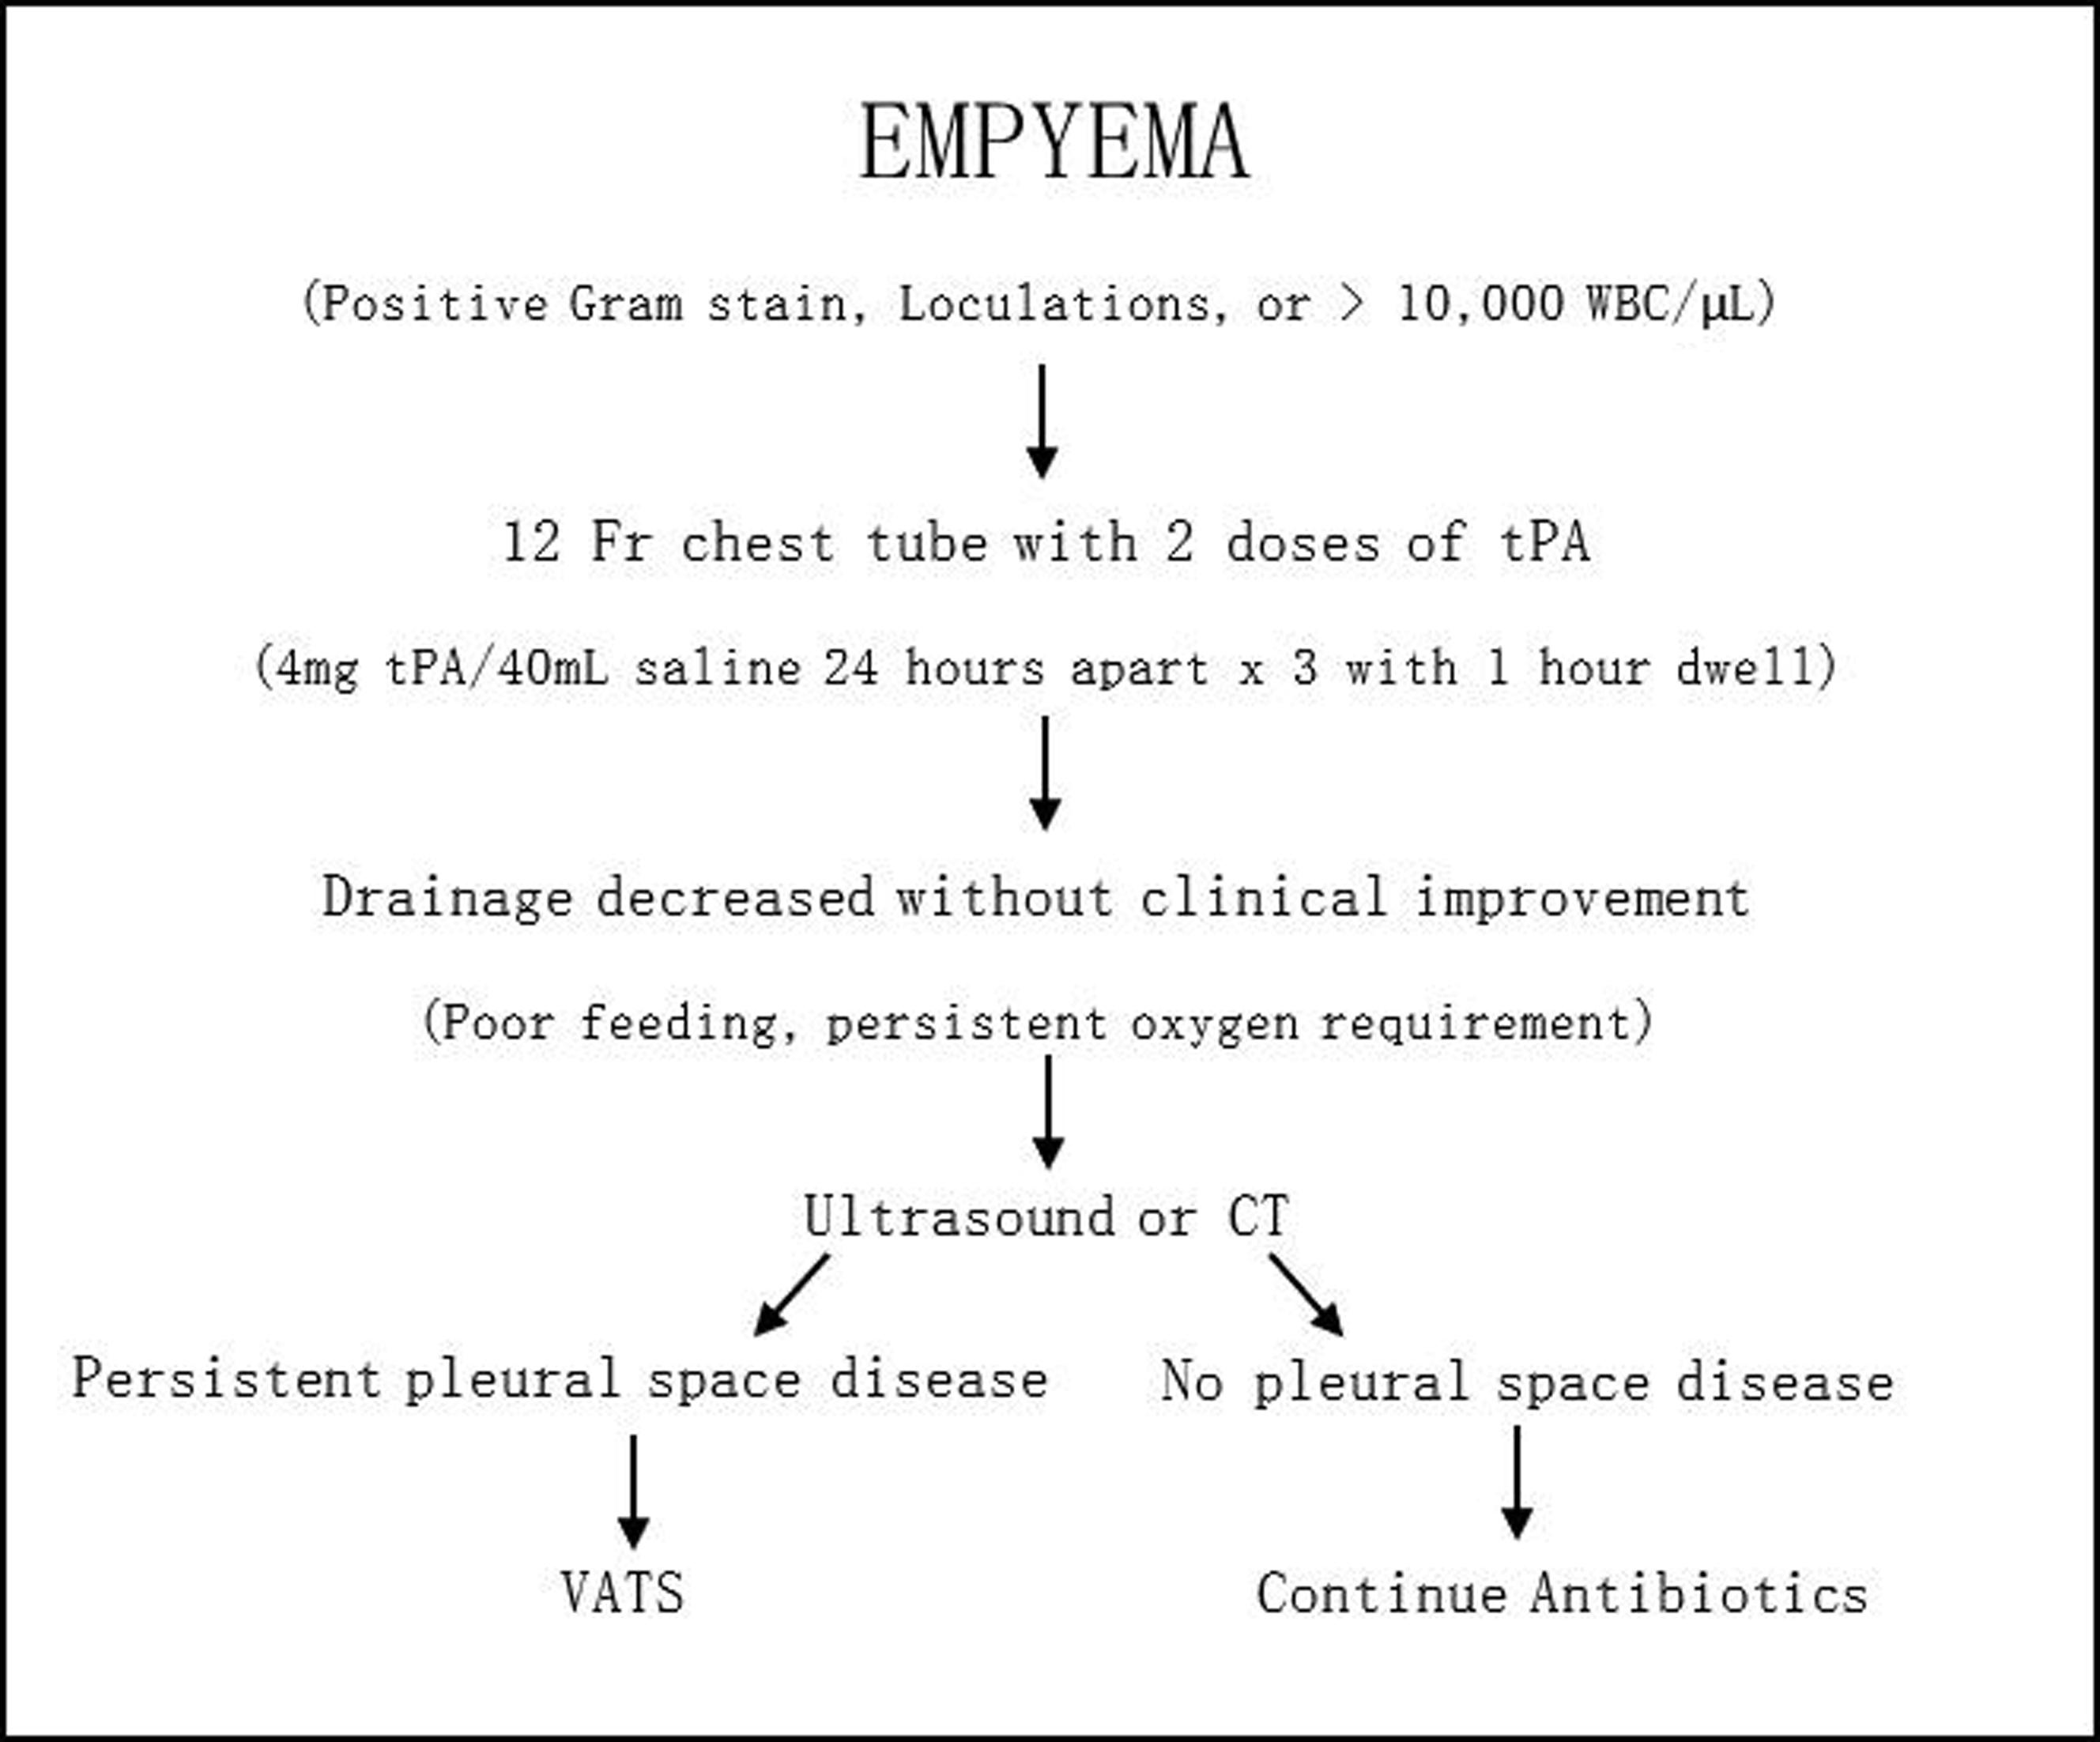 Fig. 34-2, The current management algorithm for an empyema at Children’s Mercy Hospital is shown. CT, computed tomography; tPA, tissue plasminogen activator; VATS, video-assisted thoracic surgery; WBC, white blood cell.